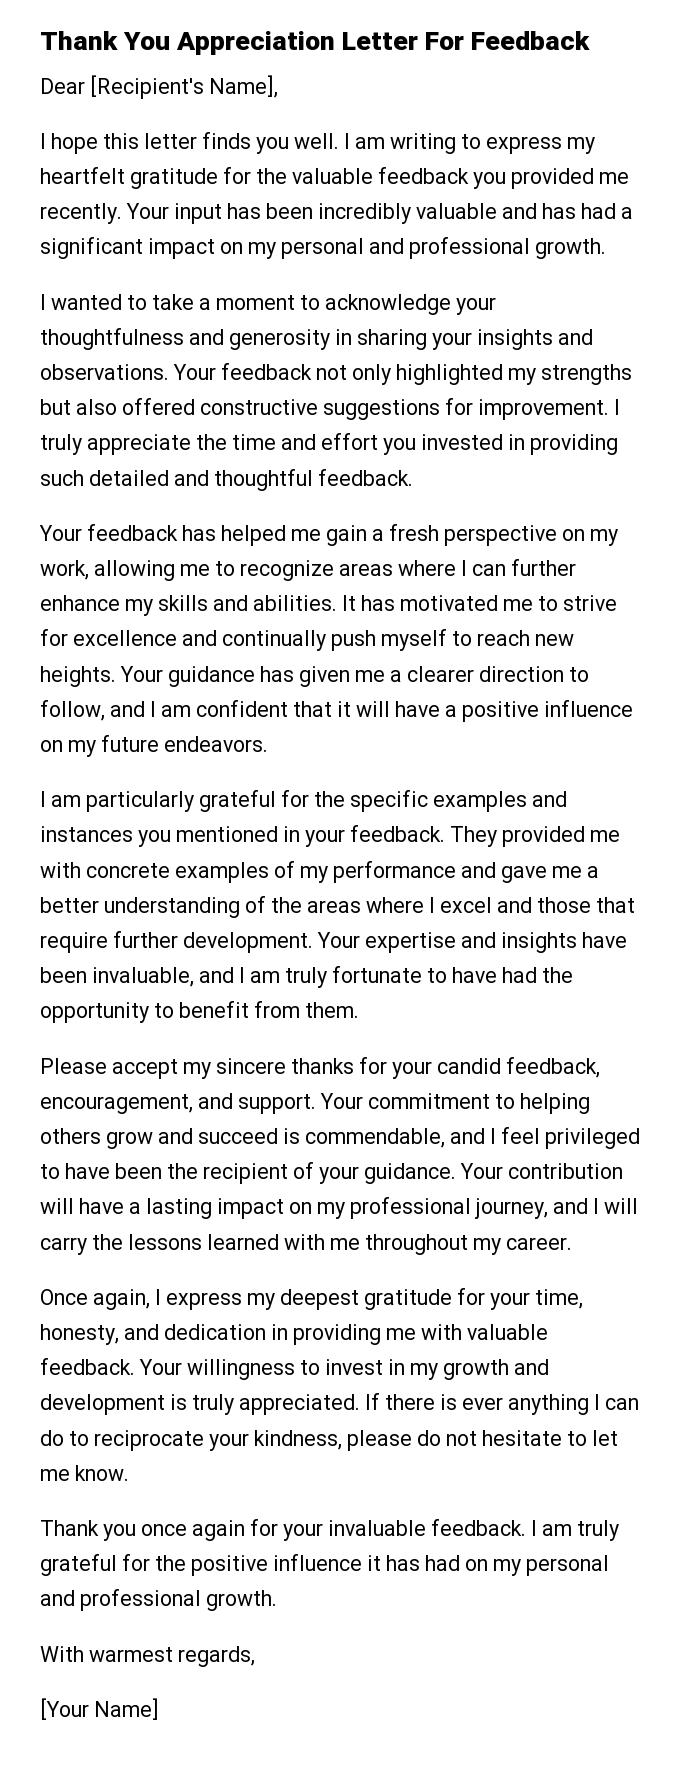 Thank You Appreciation Letter For Feedback